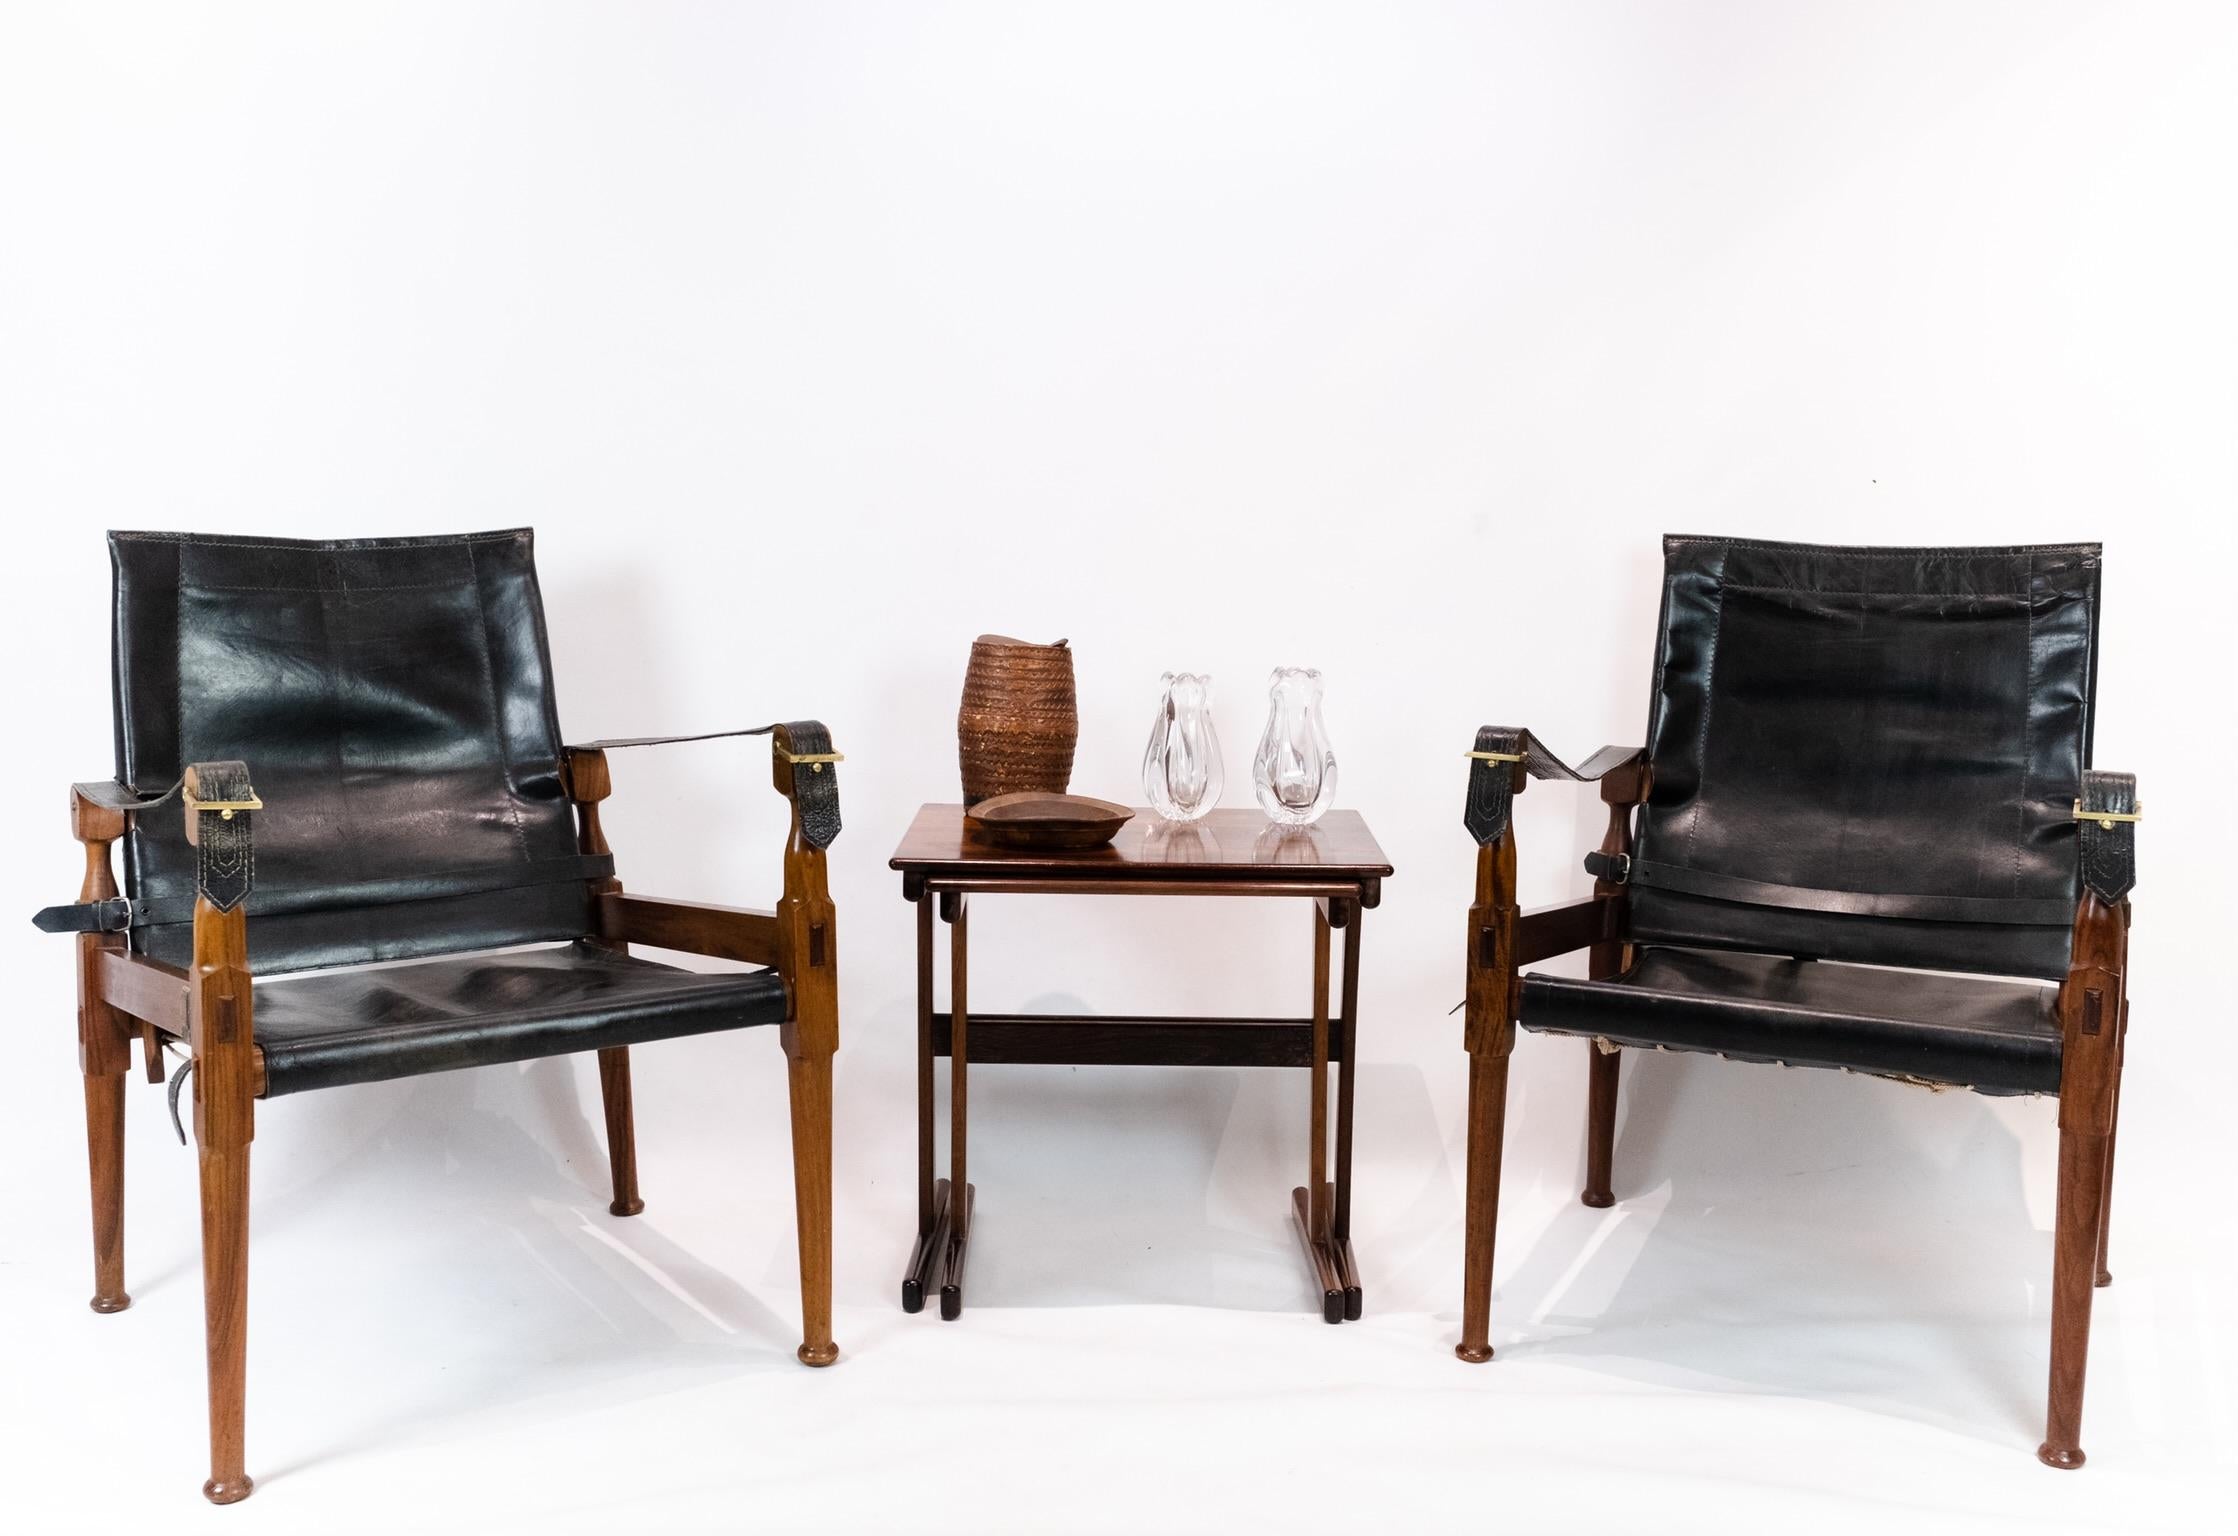 A pair of Safari chairs in walnut and black patinated leather from the circa 1960s is a stylish and classic addition to any interior space.

Safari chairs, also known as campaign chairs, are known for their portable and collapsible design, making